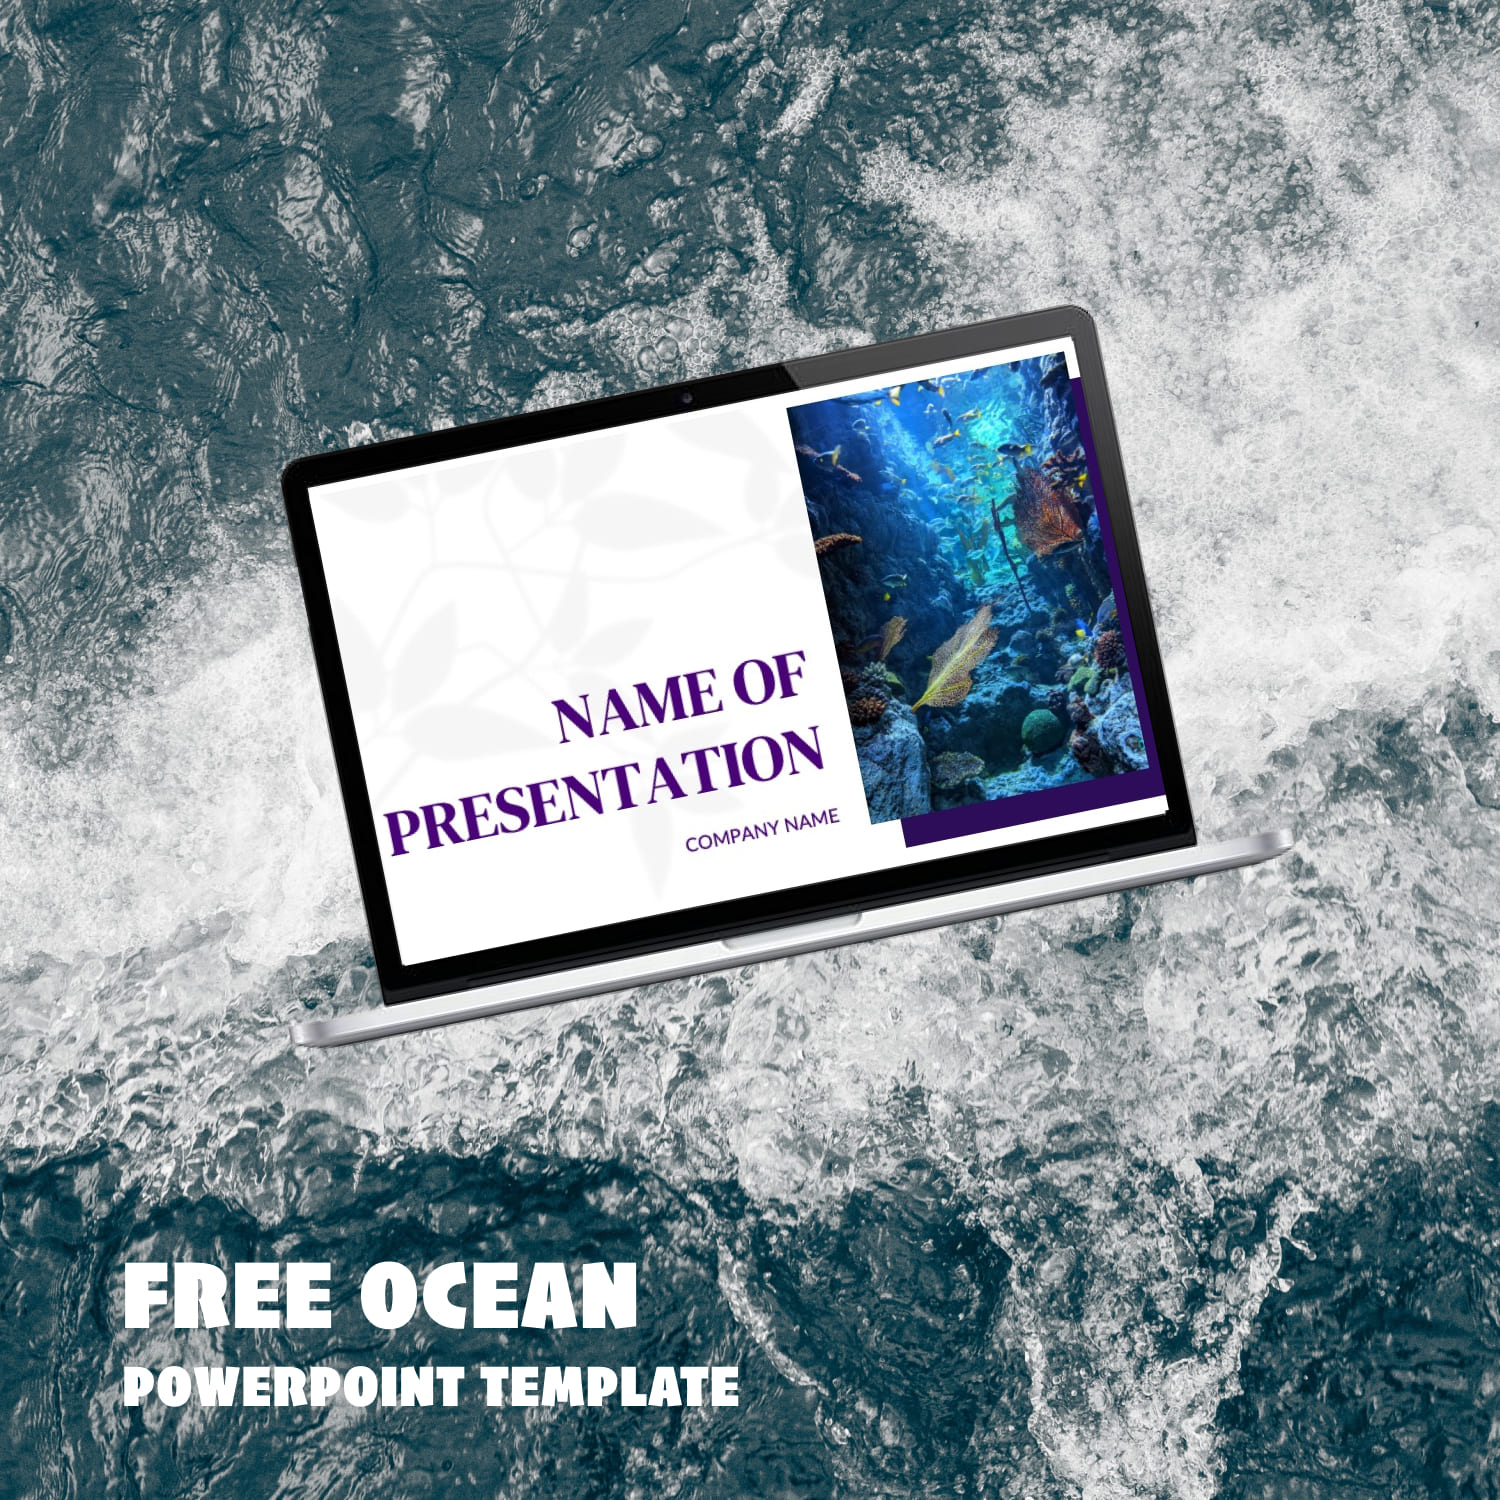 Free ocean powerpoint template - main image preview.